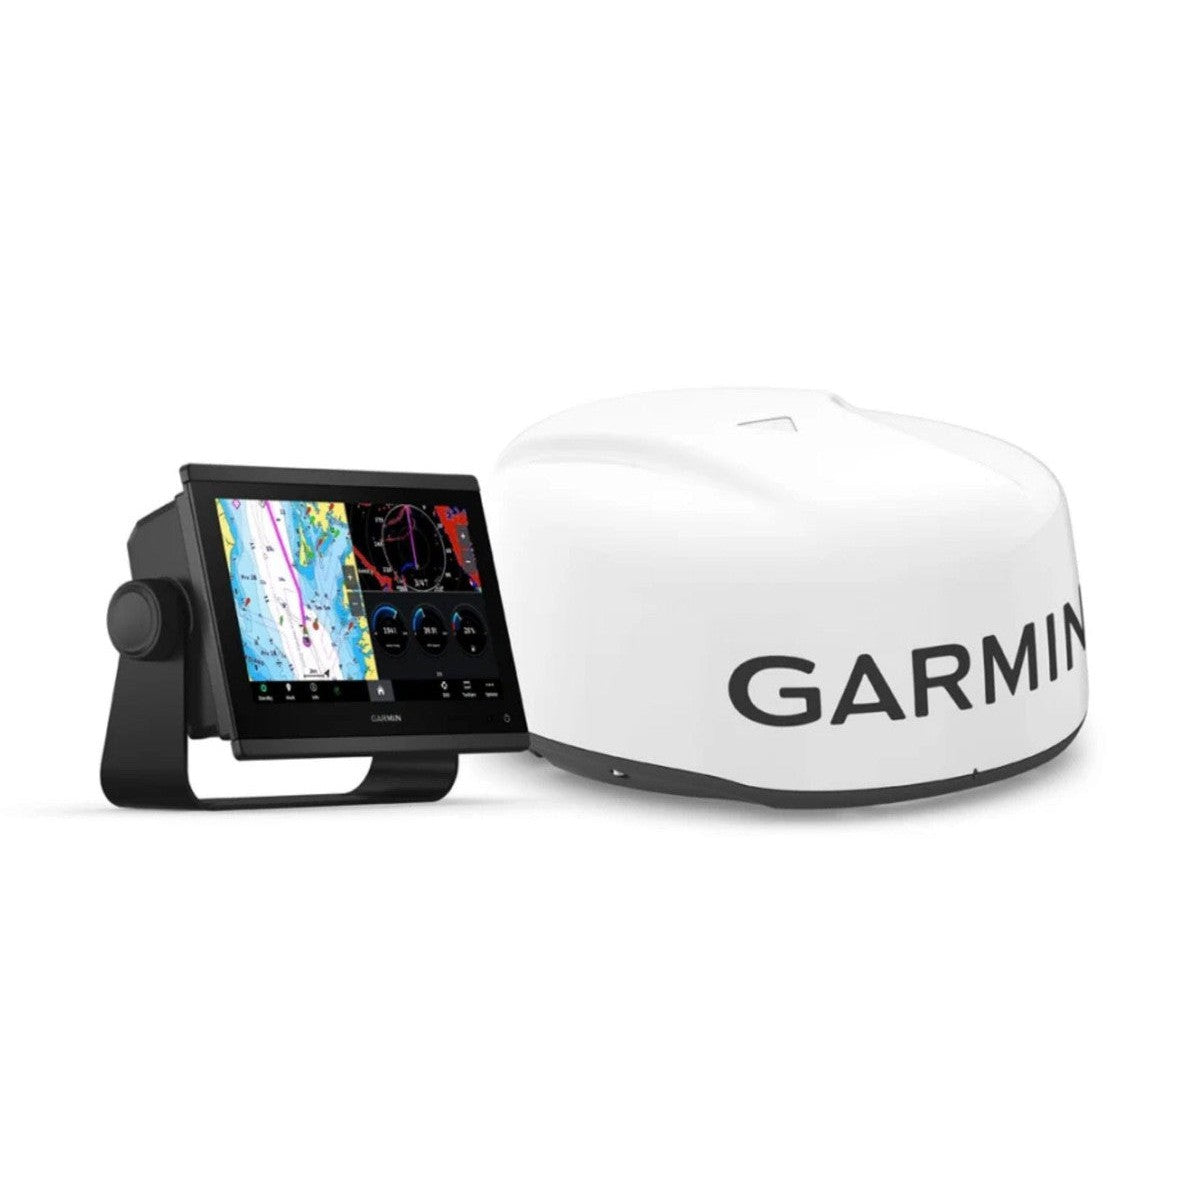 Garmin Not Qualified for Free Shipping Garmin GPSMAP 923xsv with GMR 18 HD3 #010-02366-52